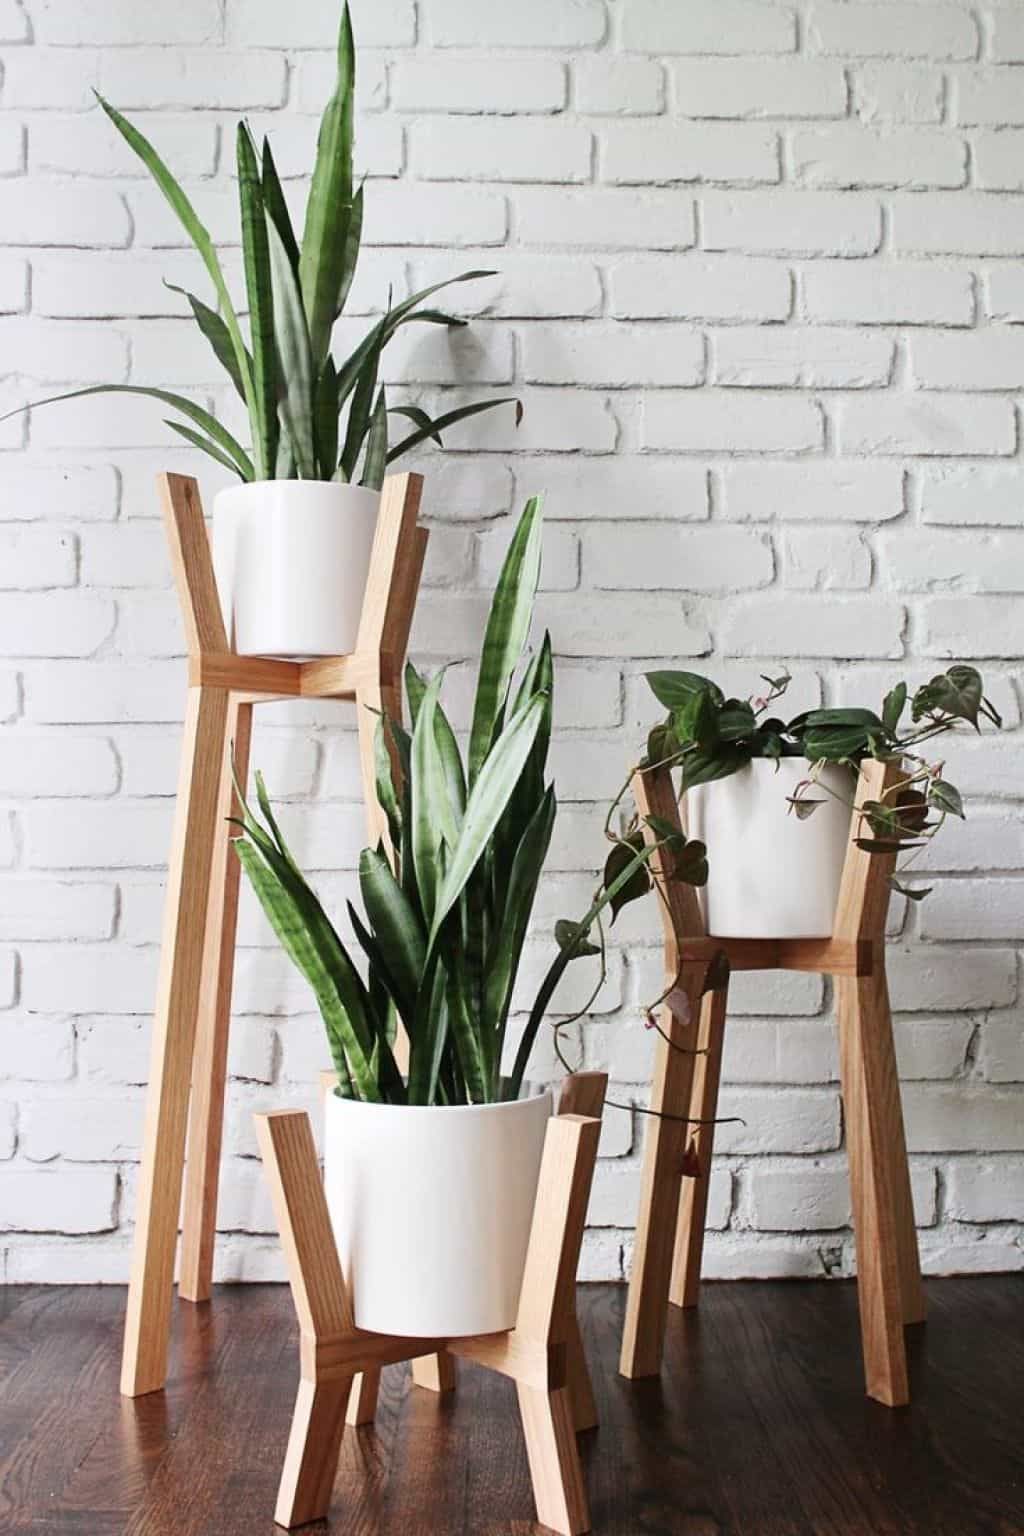 18 pidestall plants Stand ideas